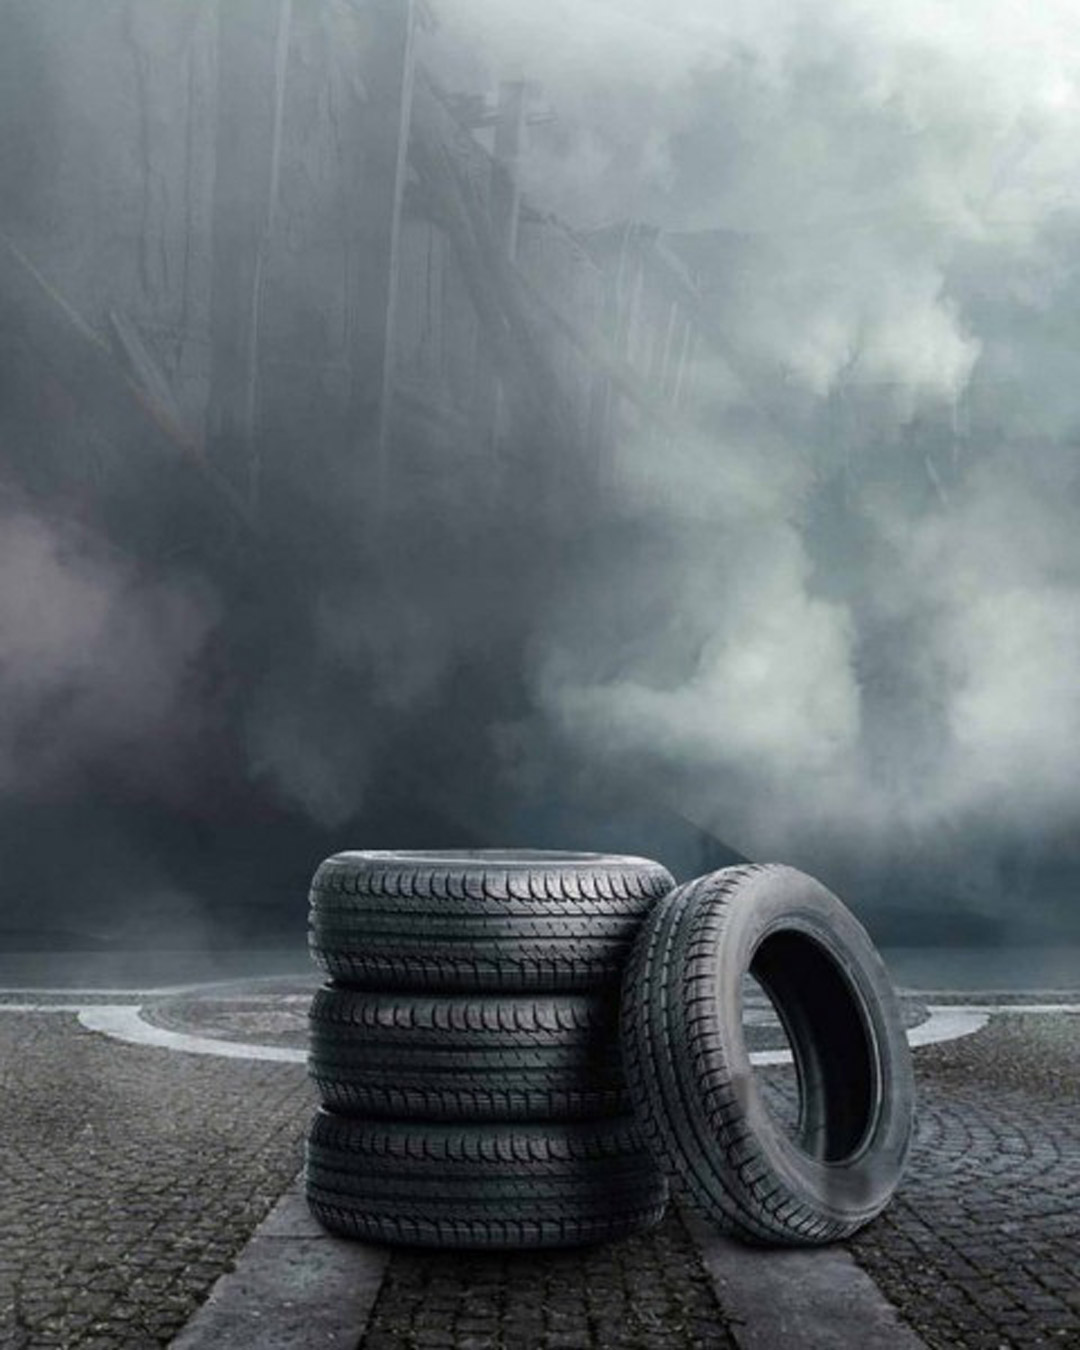 Tires And Smoke PicsArt Background Free Stock Image